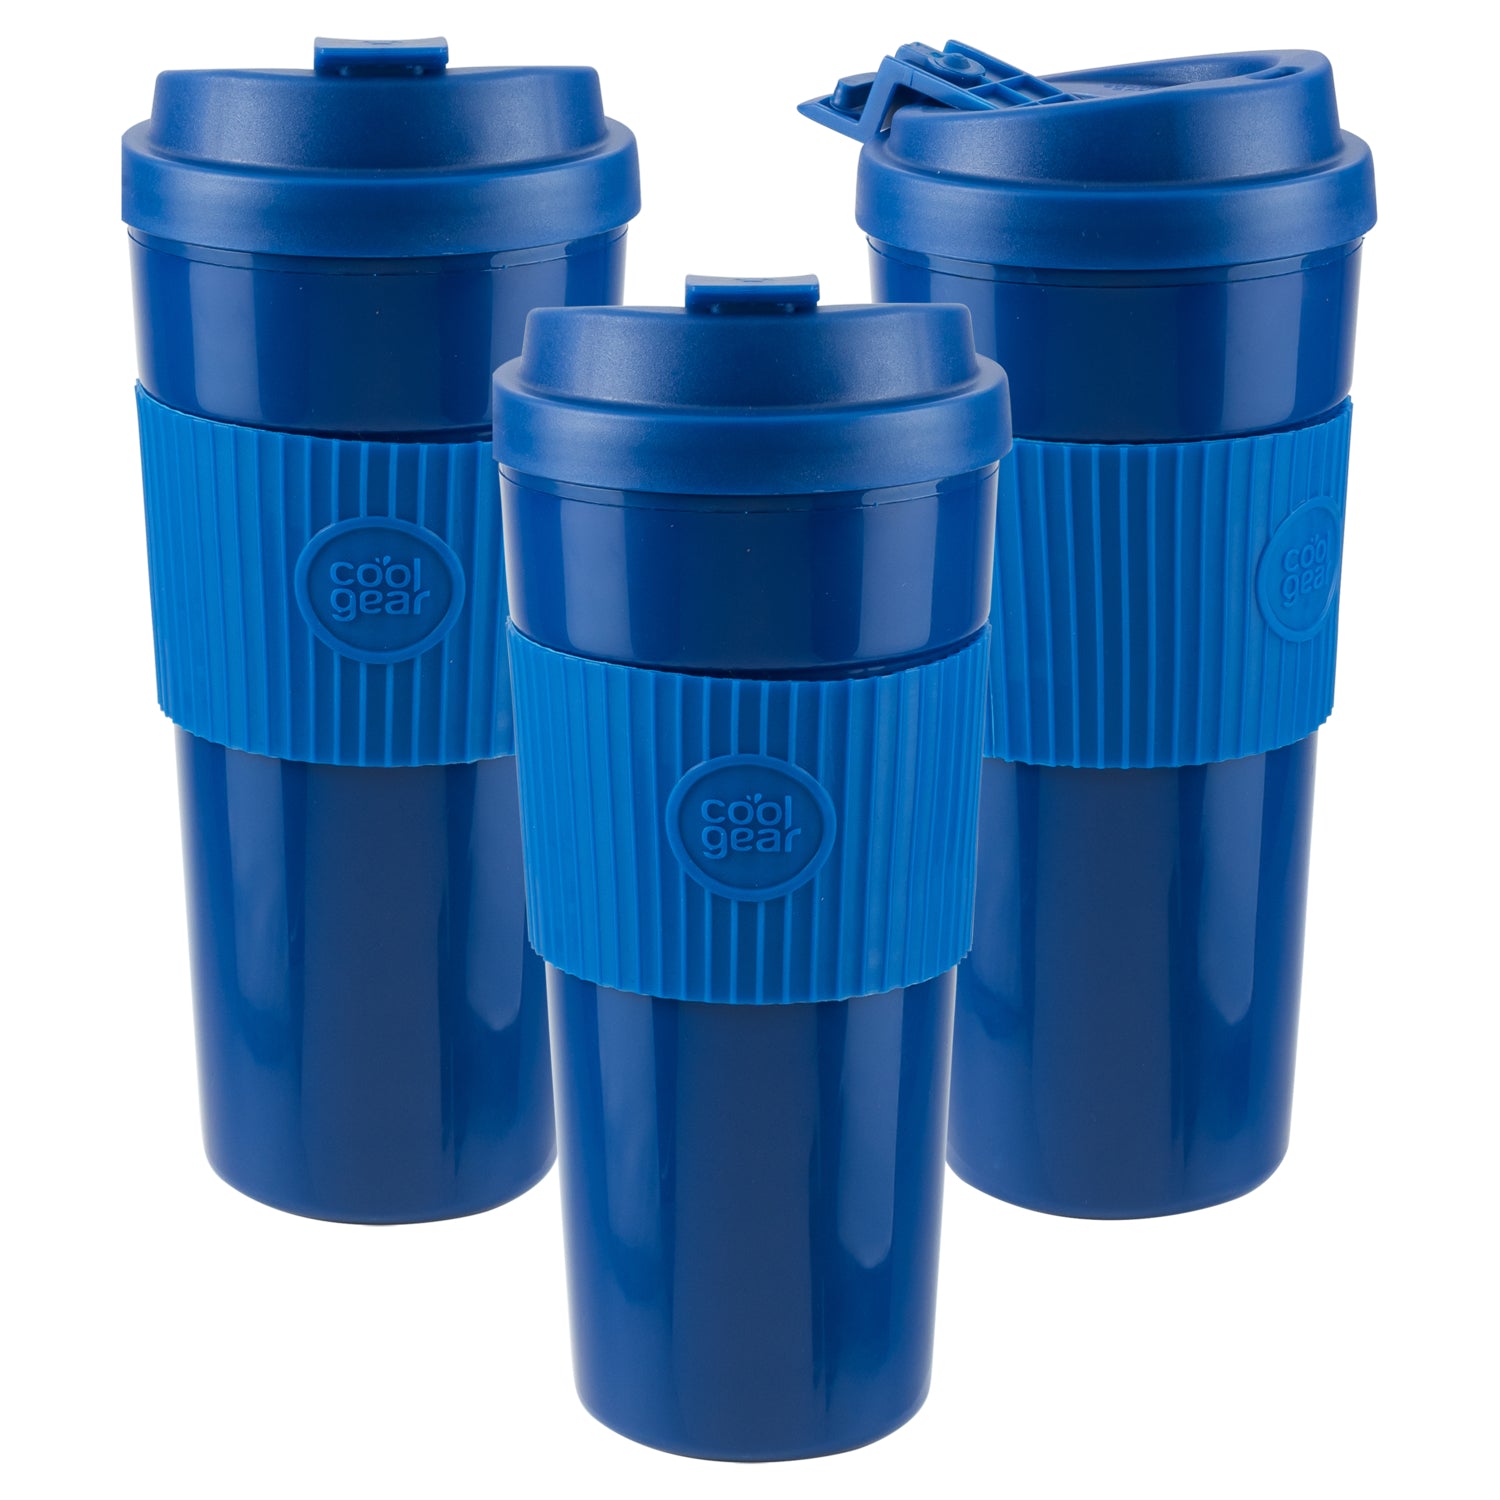 Cool Gear | Water Bottles, Tumblers, Drink Cans, Travel Mugs